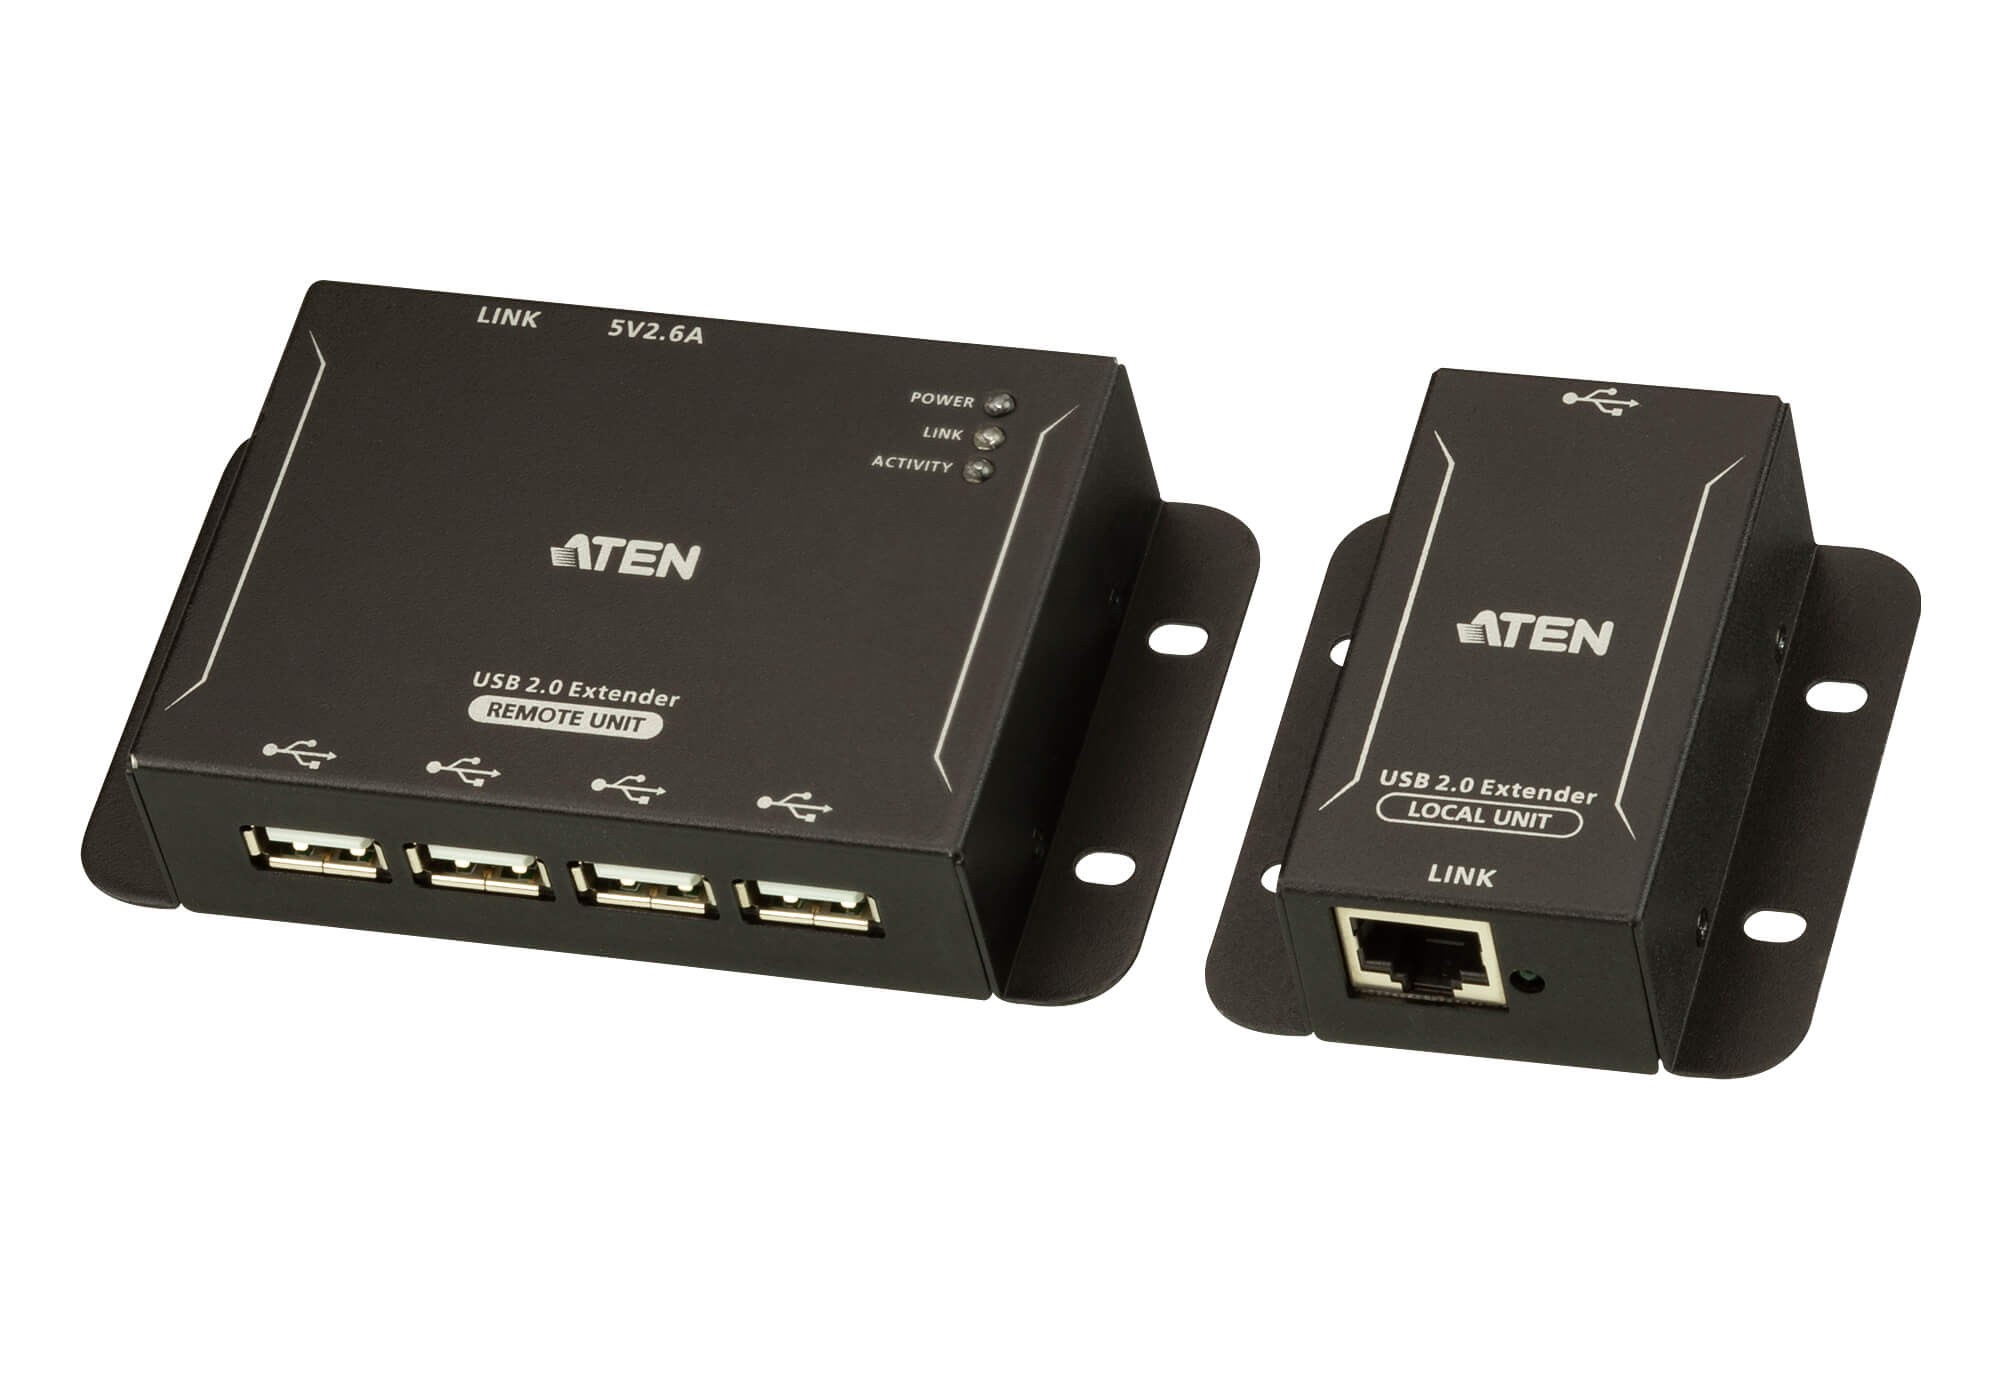 UCE3250  4-Port USB 2.0 Cat 5 Extender (up to 50m)